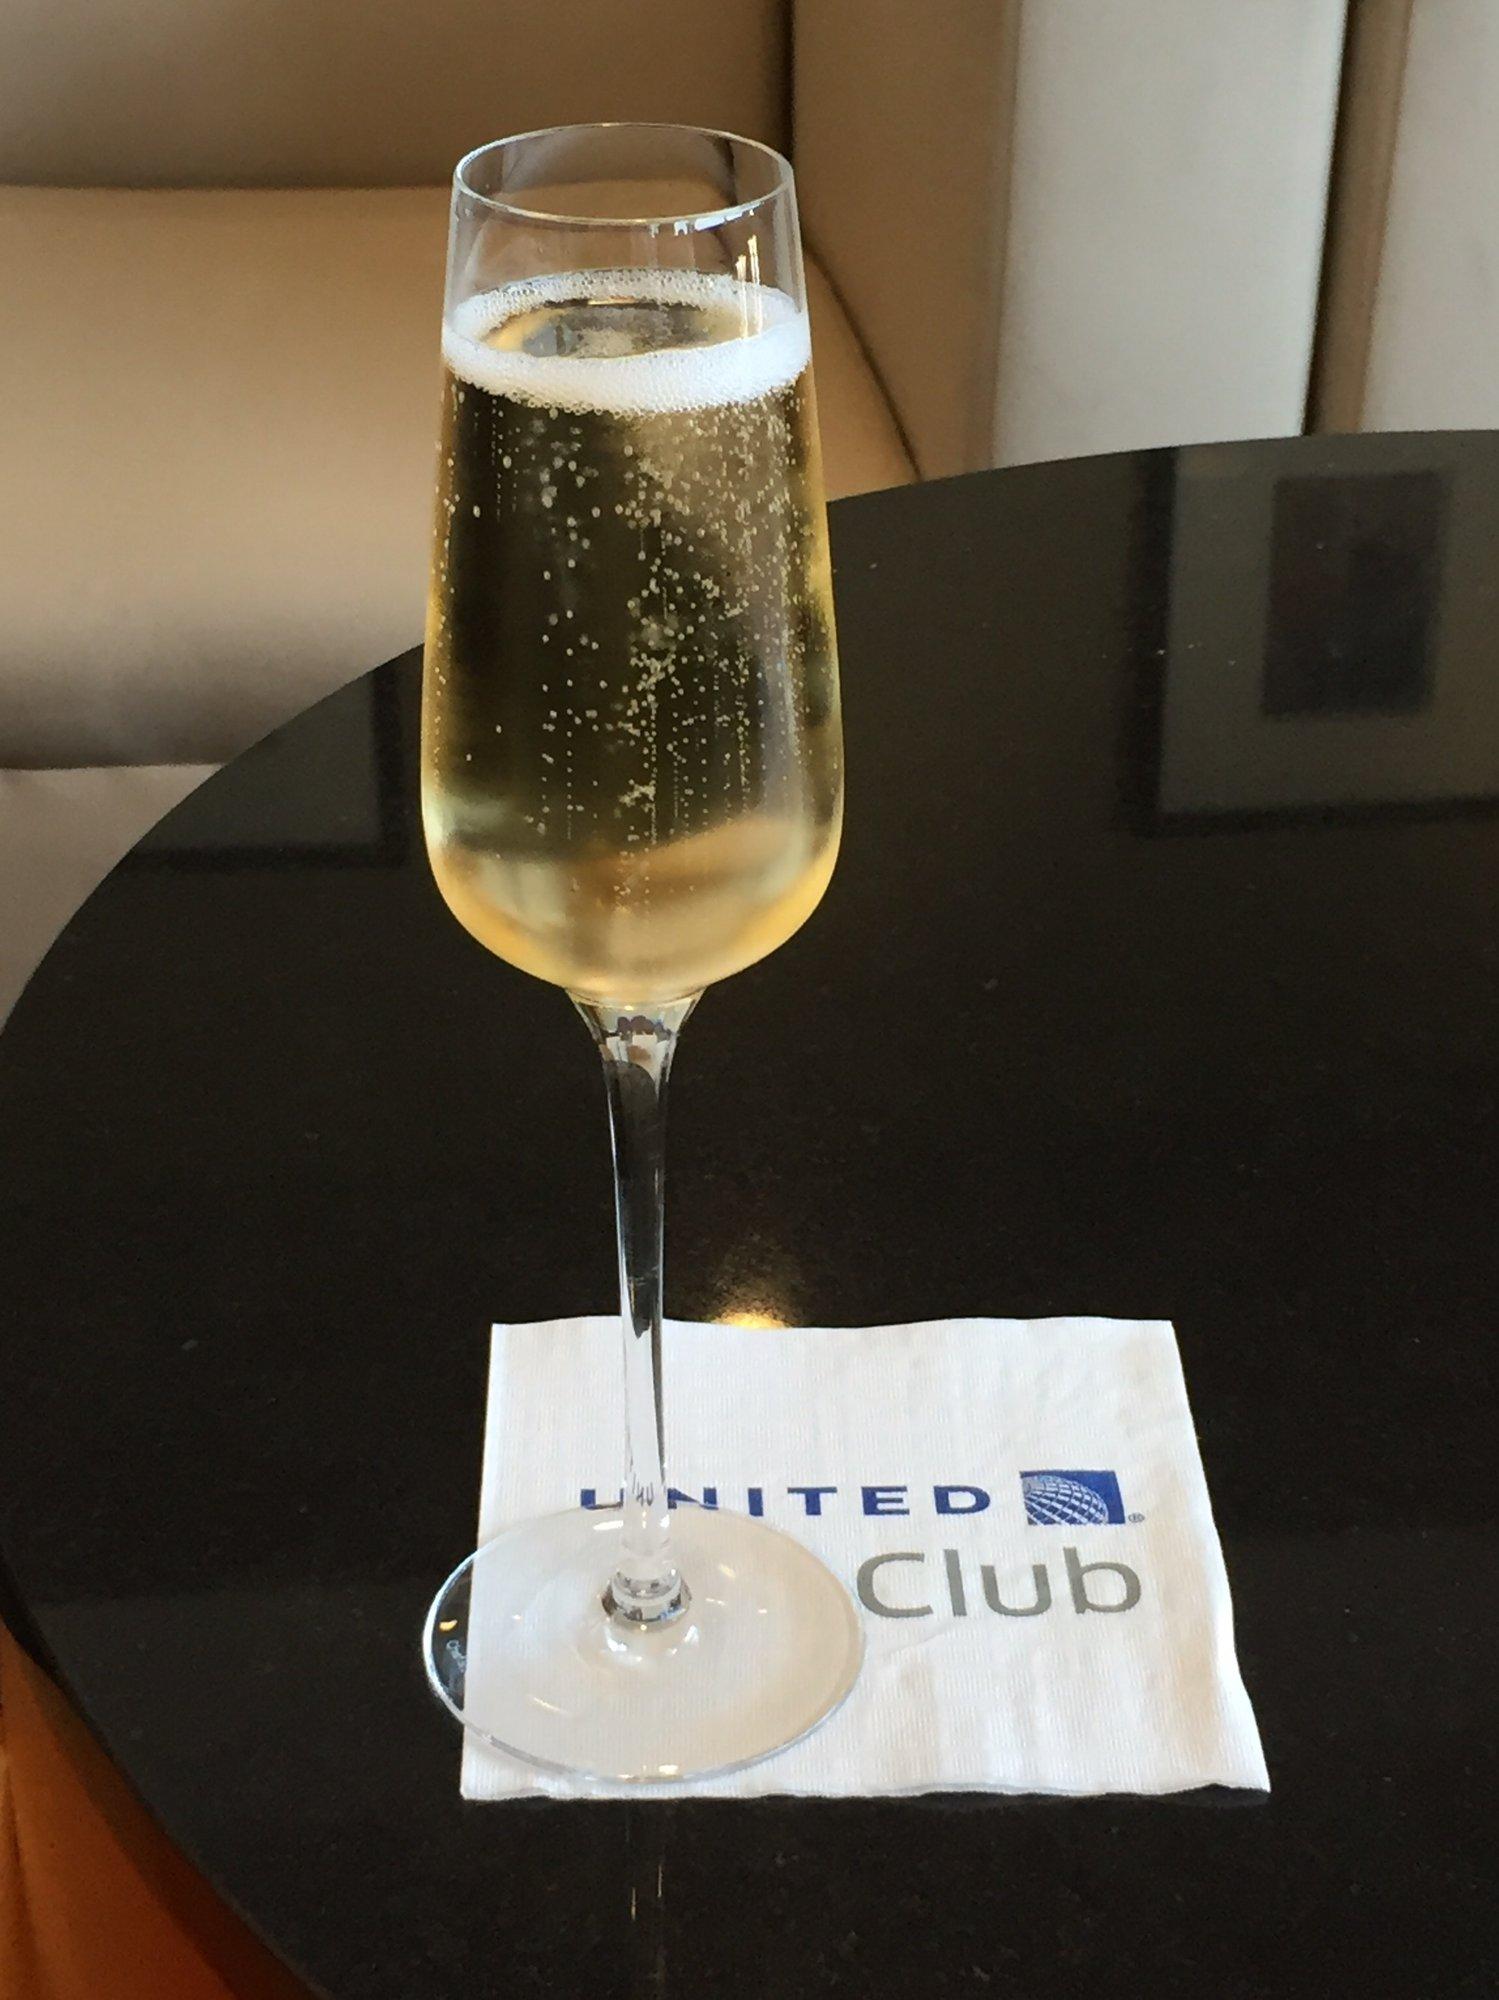 United Airlines United Club image 22 of 22